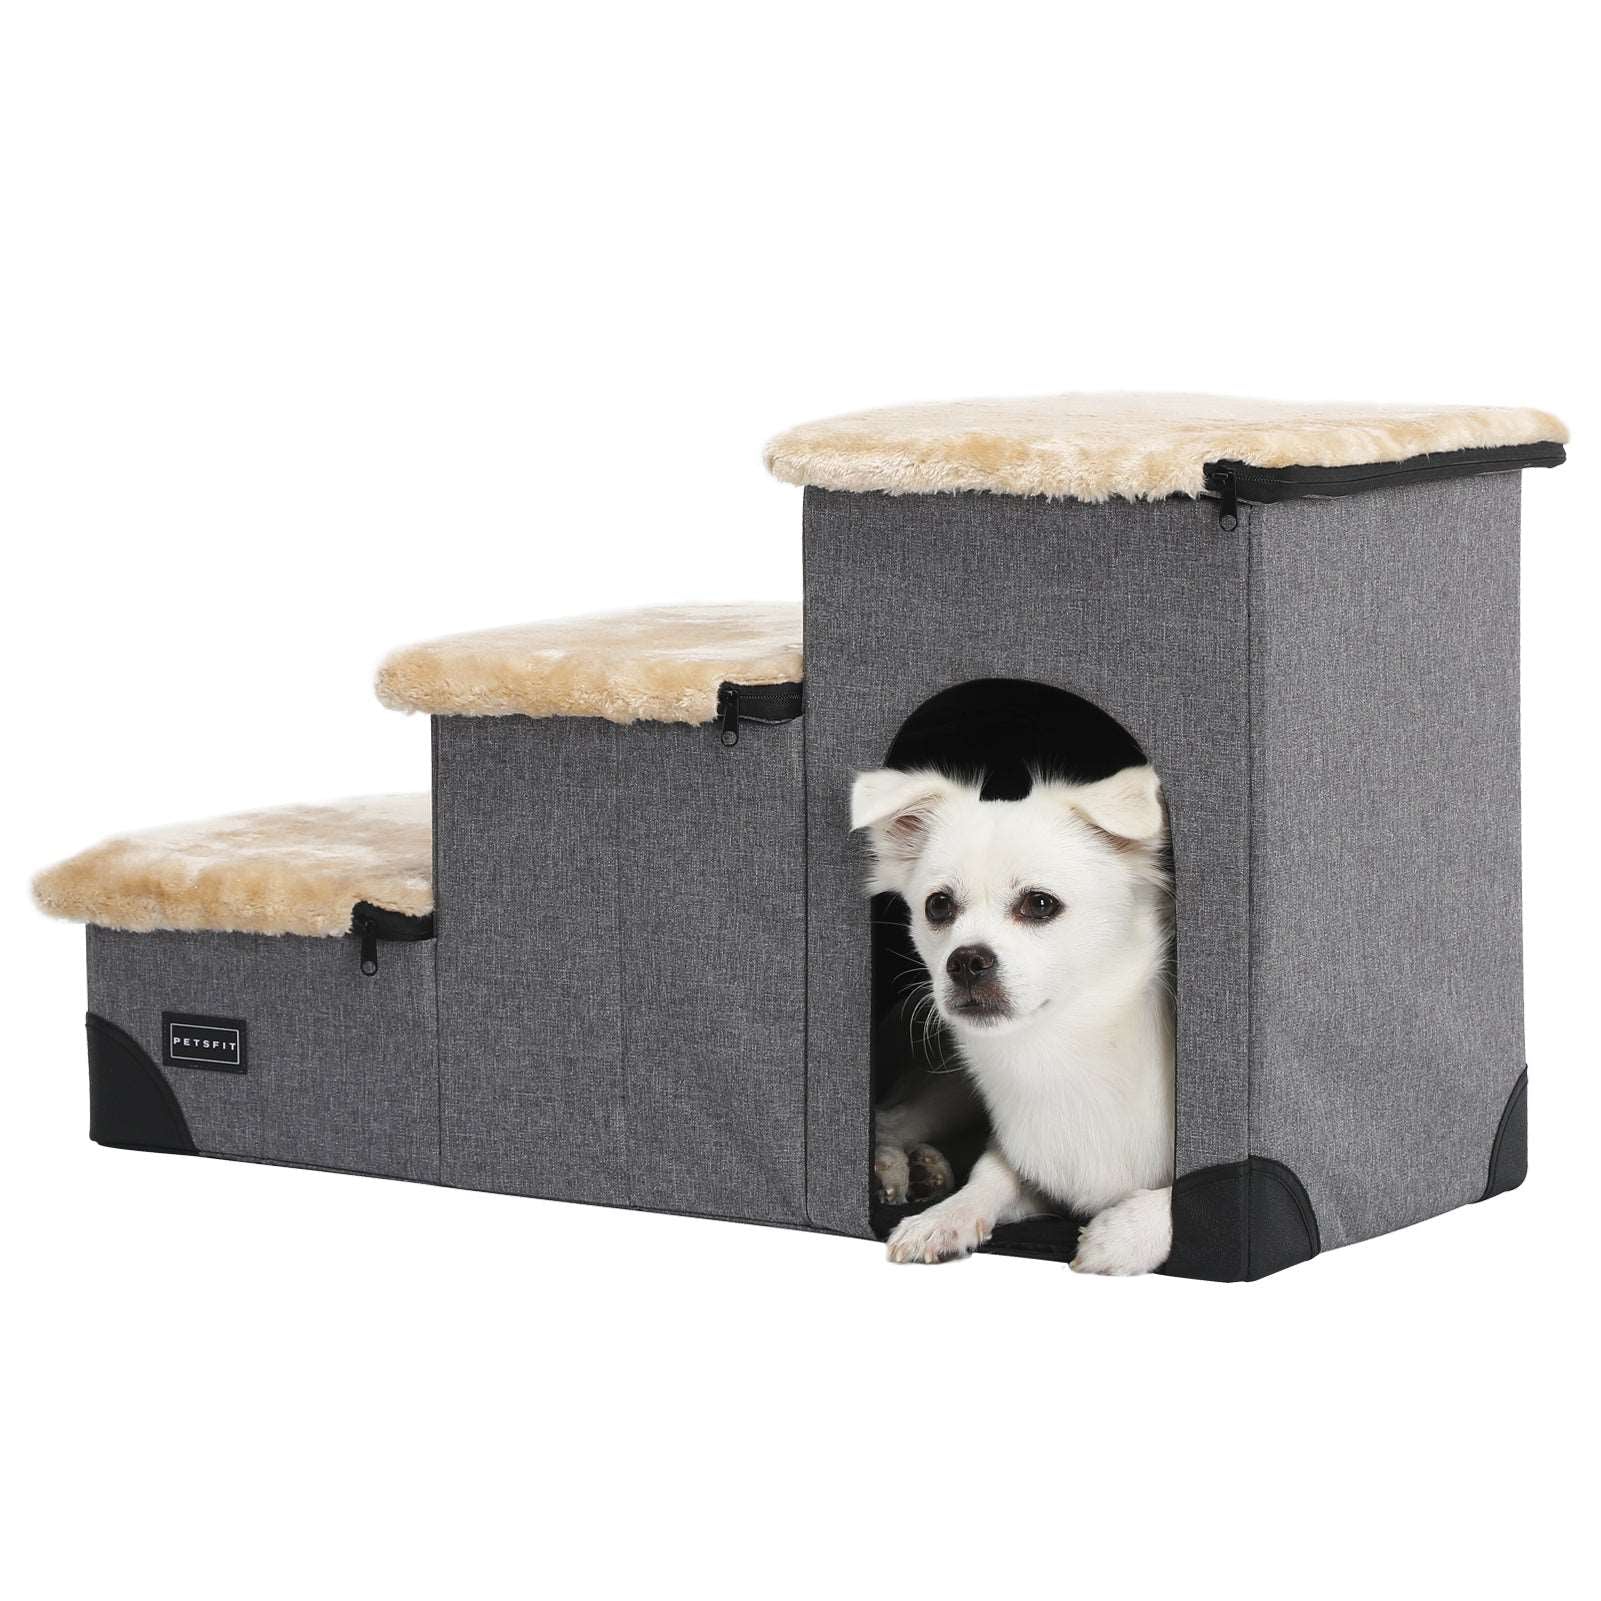 Petsfit-Pet-Steps-3-in-1-Multi-Use-with-Storage-Room-02